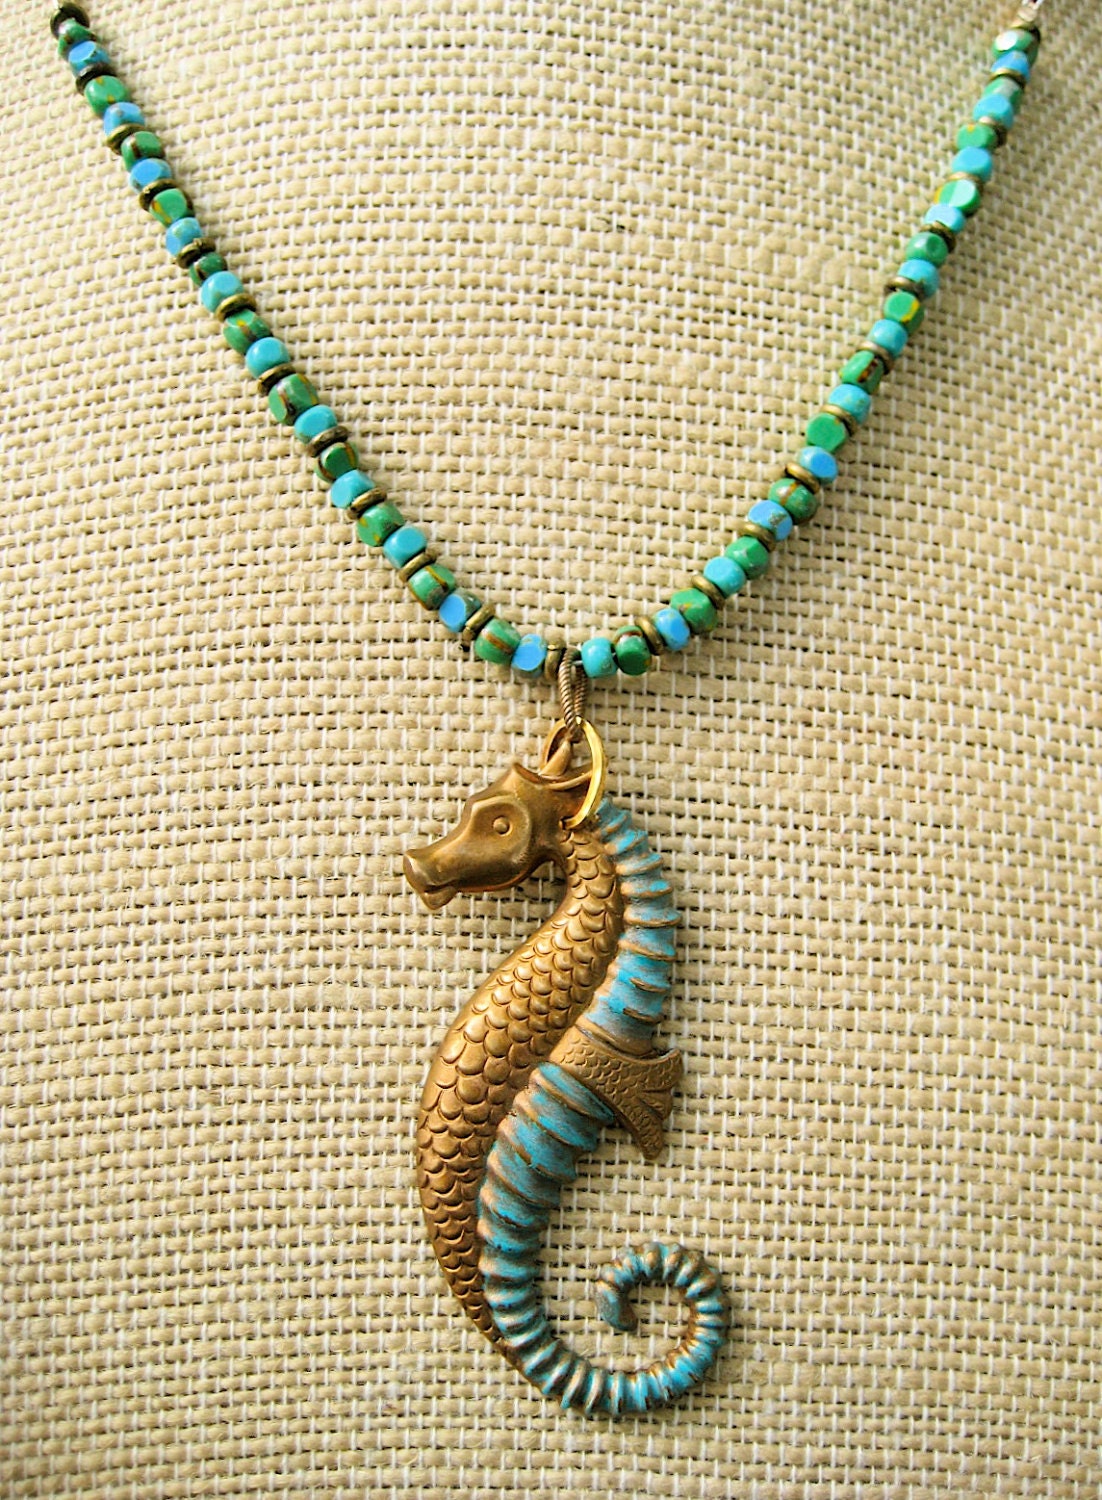 Patina Brass Seahorse Necklace with Blue Green Czech Glass Beads and Antiqued Brass Chain - CatchingWaves